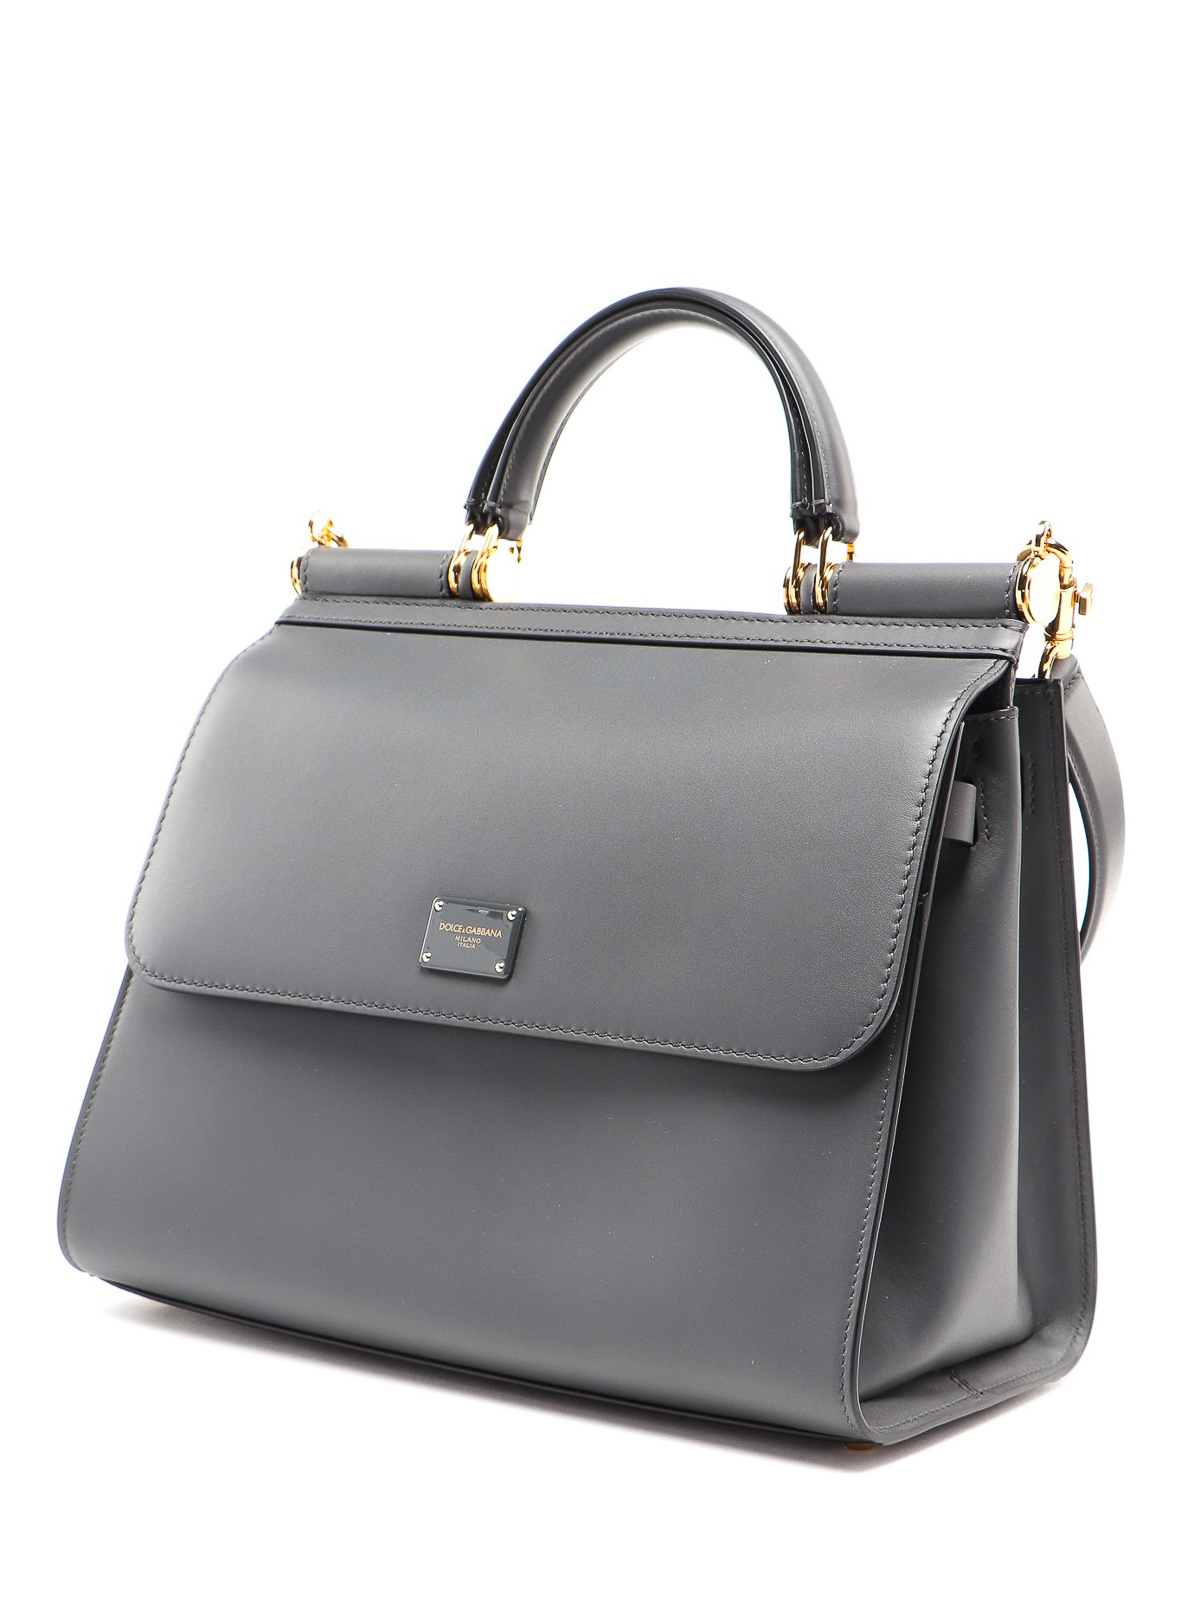 Dolce & Gabbana Sicily 58 Large Leather Bag in Gray